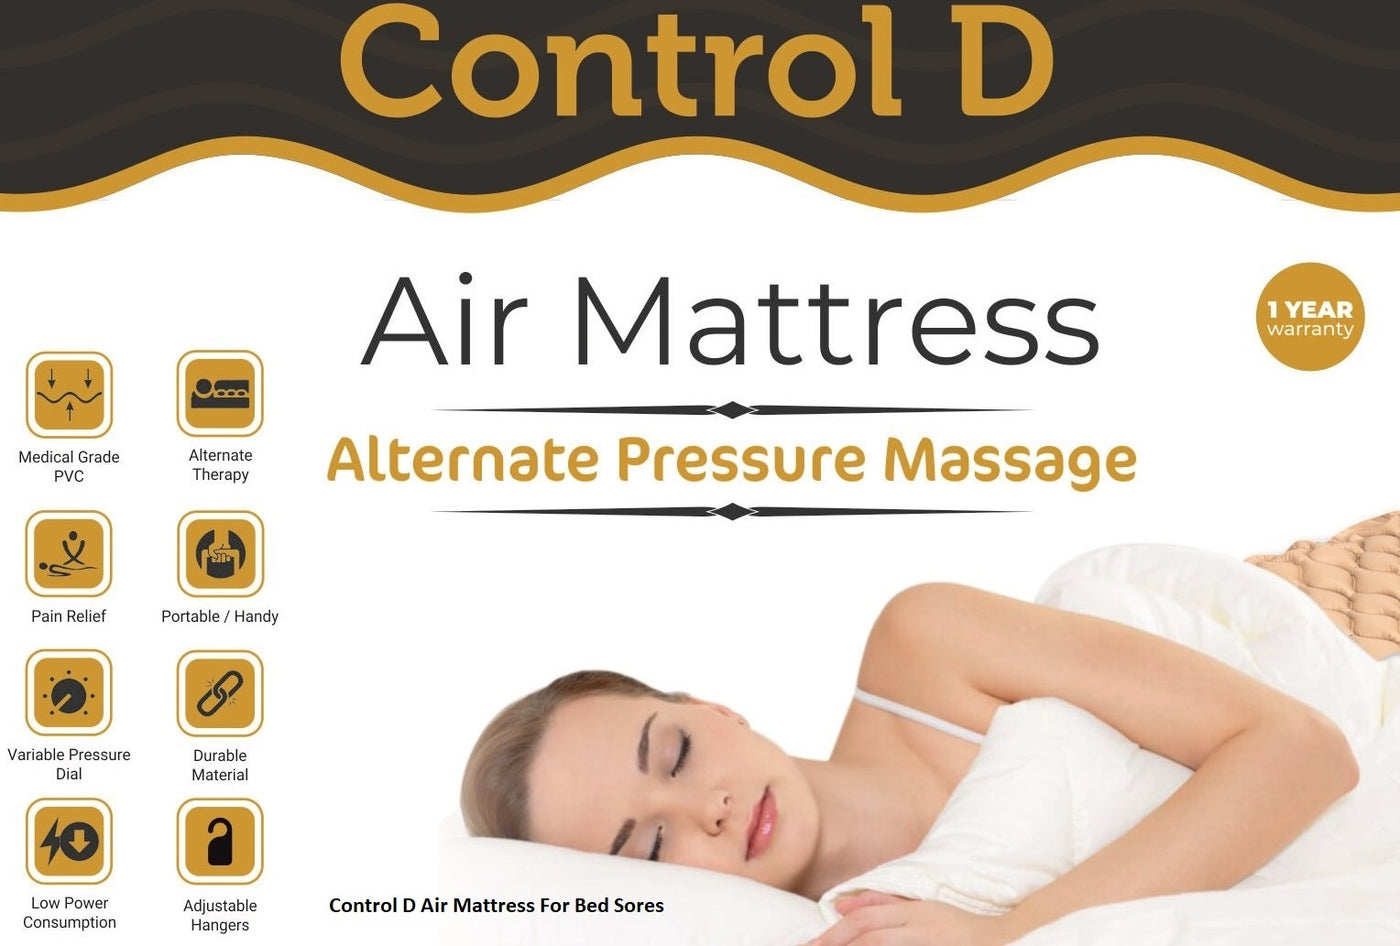 Air Mattress (Therapy For Bed Sores) Control D